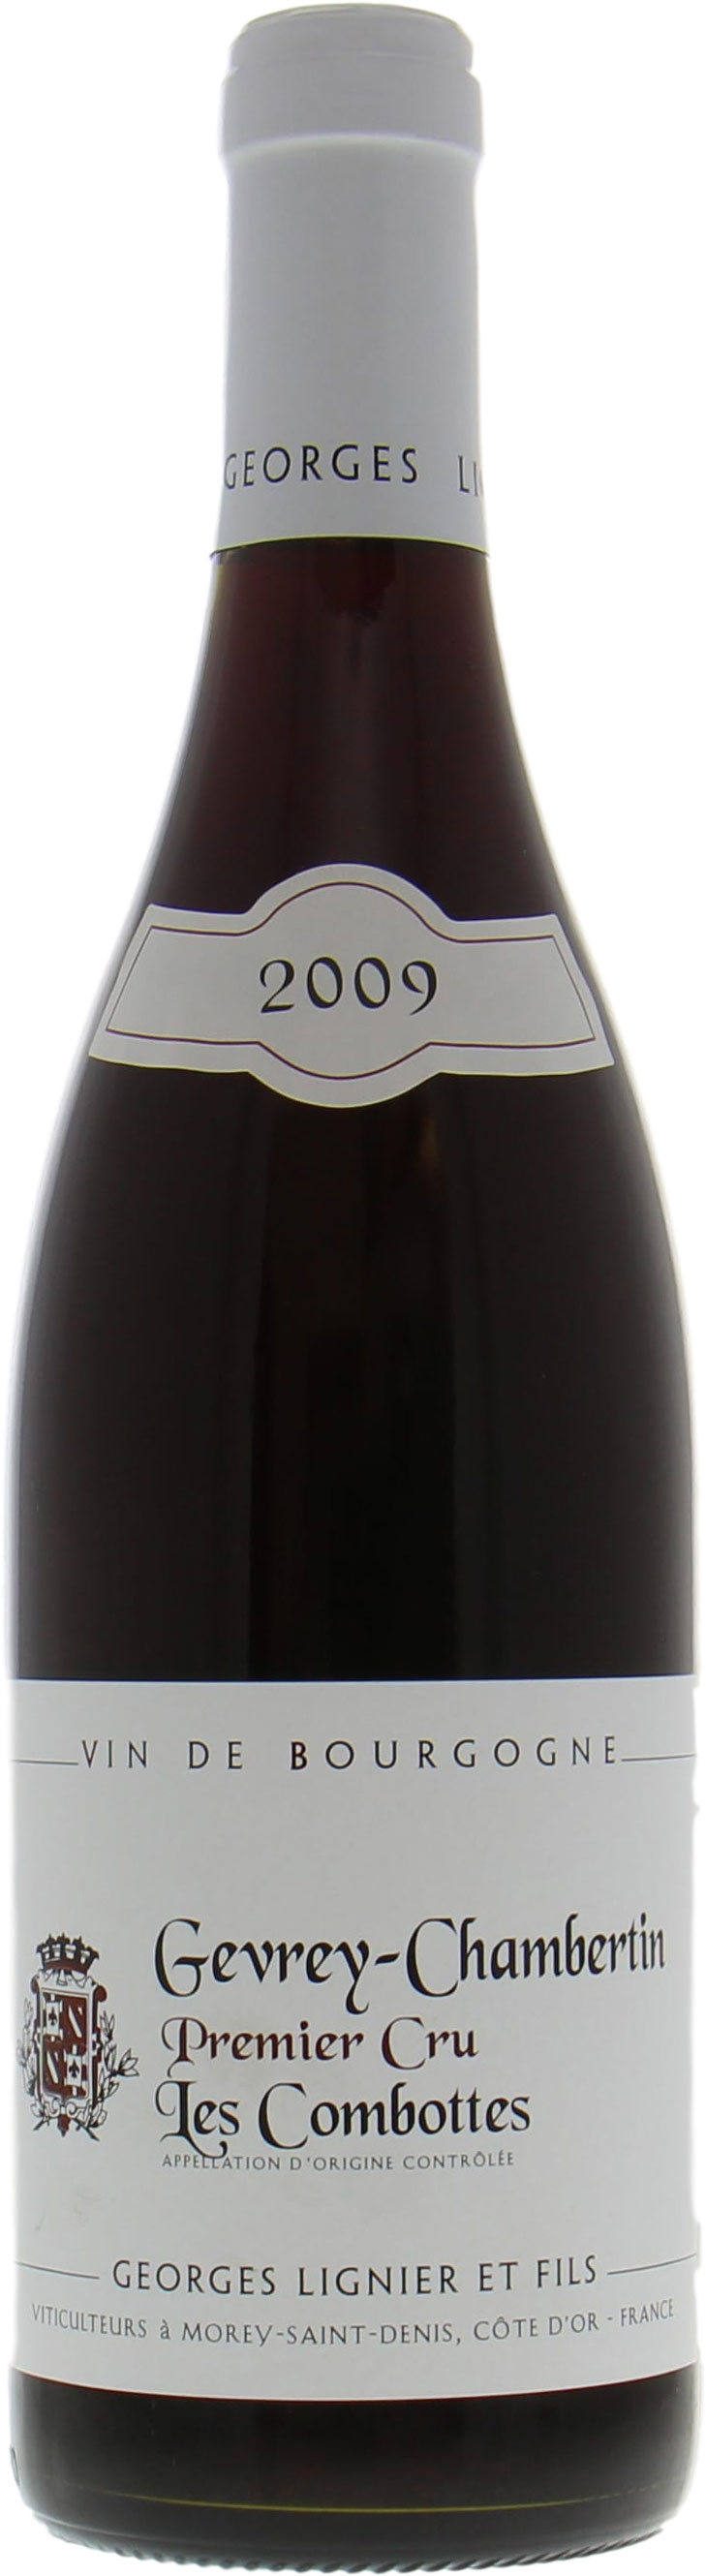 Georges Lignier - Gevrey Chambertin Les Combottes 2009 Perfect